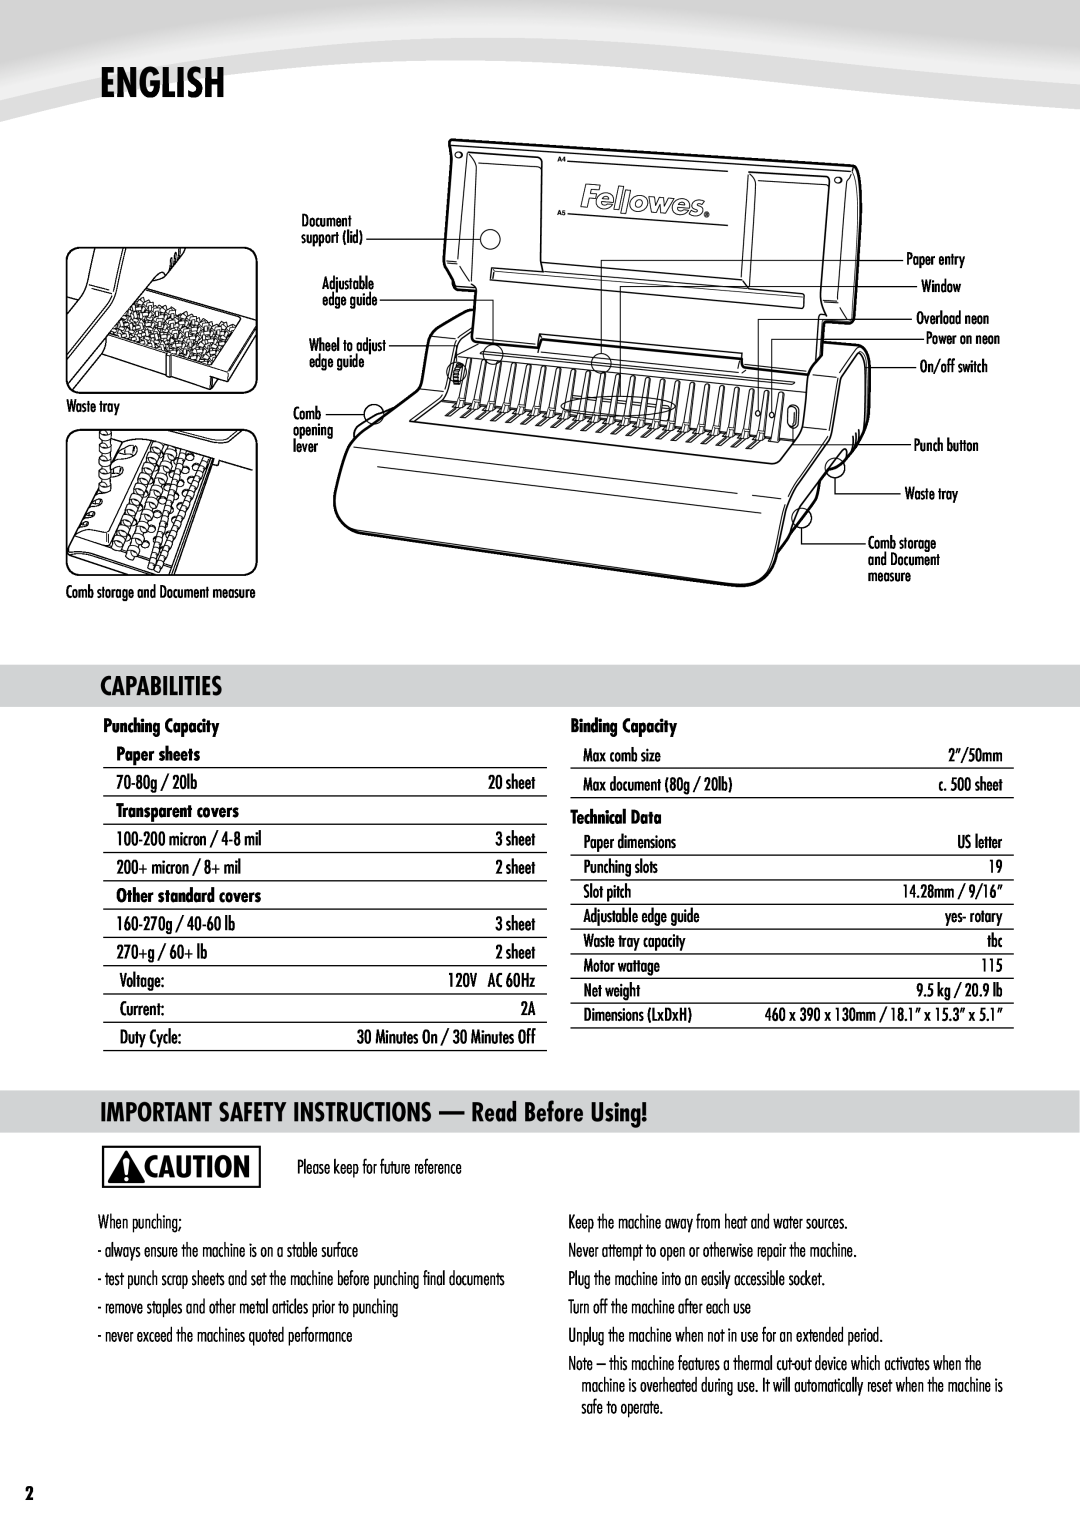 Fellowes e500 English, Capabilities, IMPORTANT SAFETY INSTRUCTIONS - Read Before Using, Punching Capacity Paper sheets 